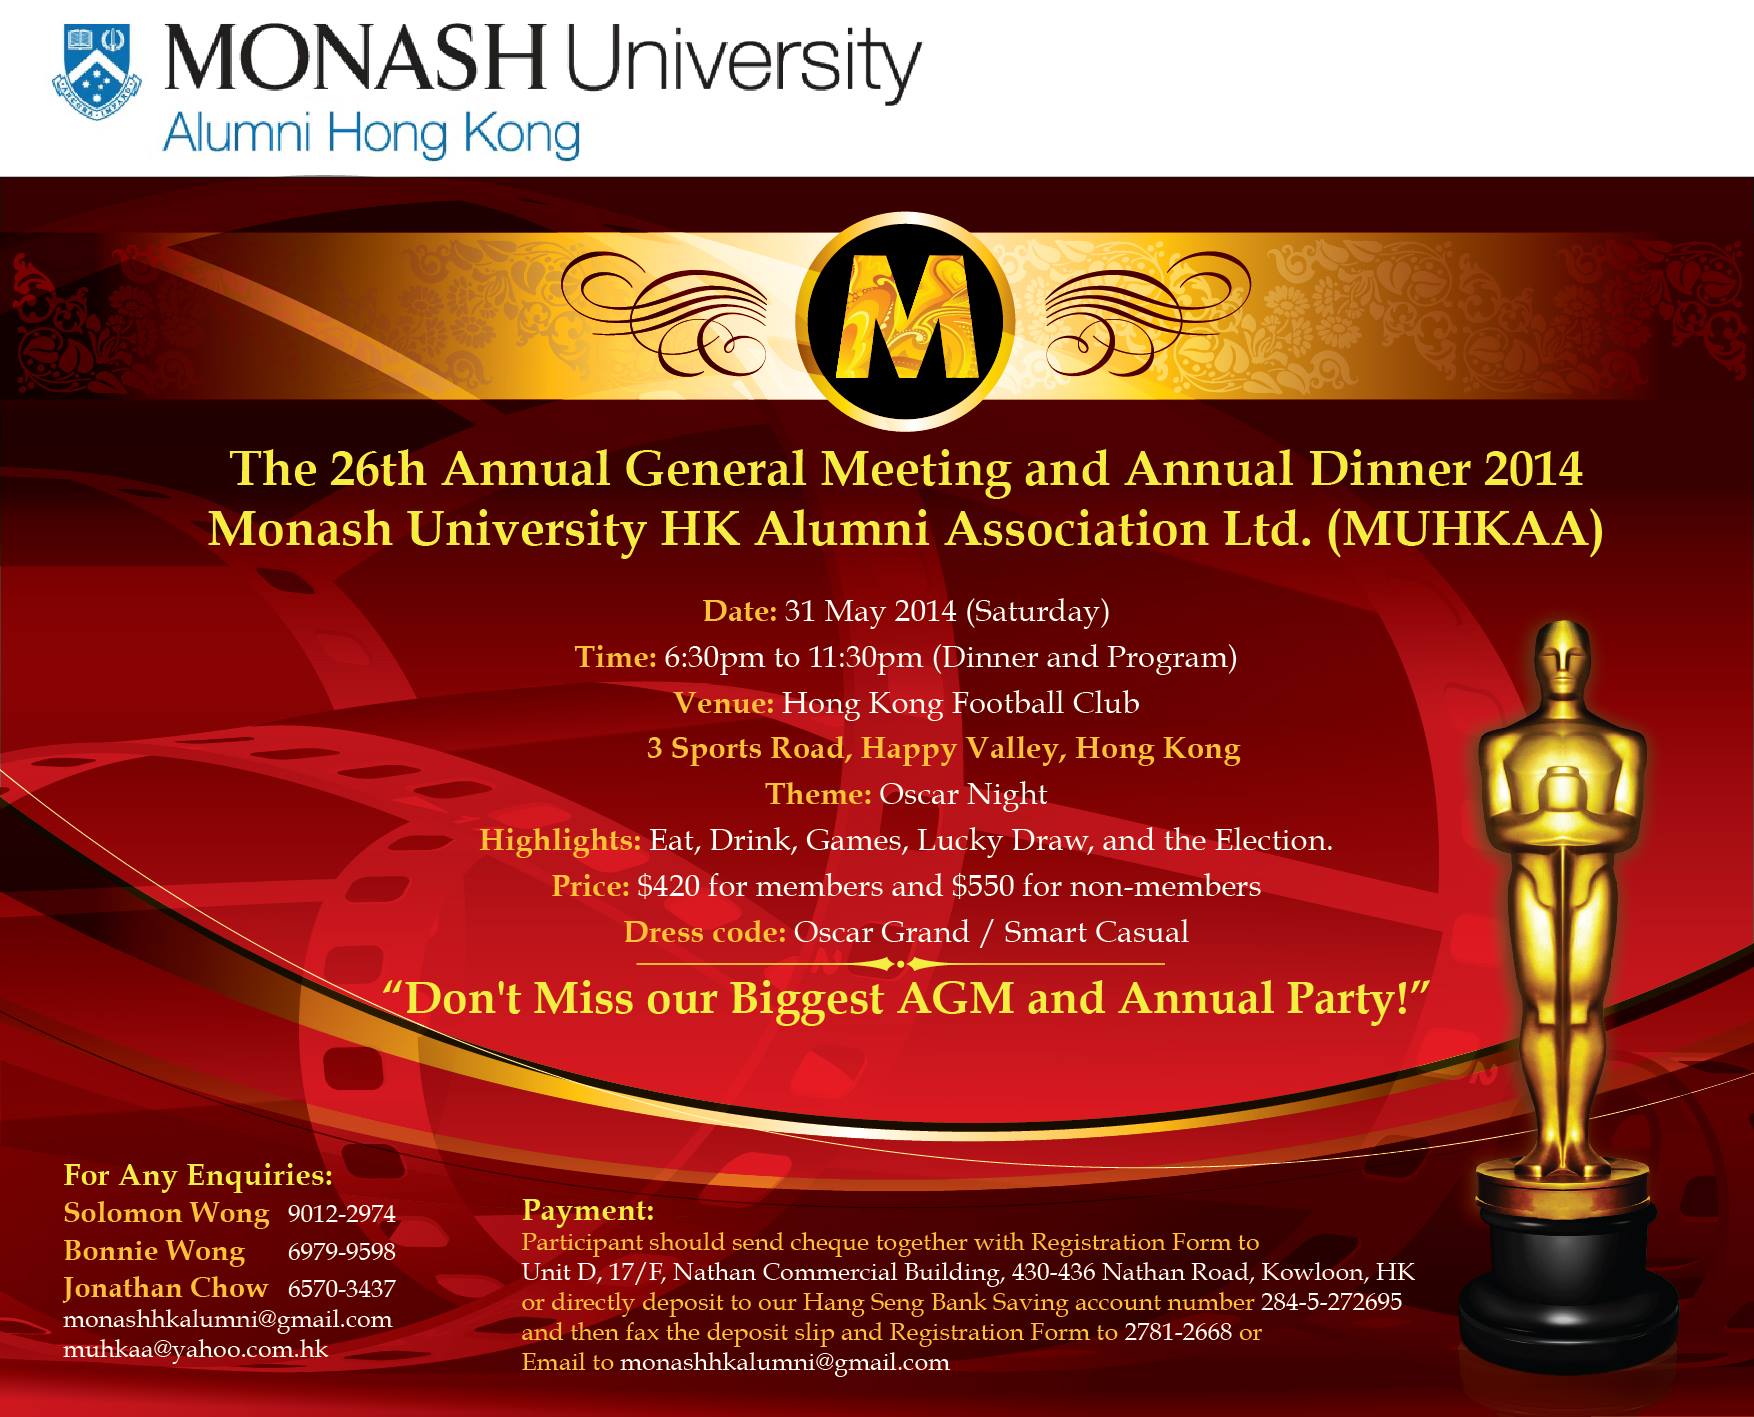 The 26th Annual General Meeting and Annual Dinner 2014